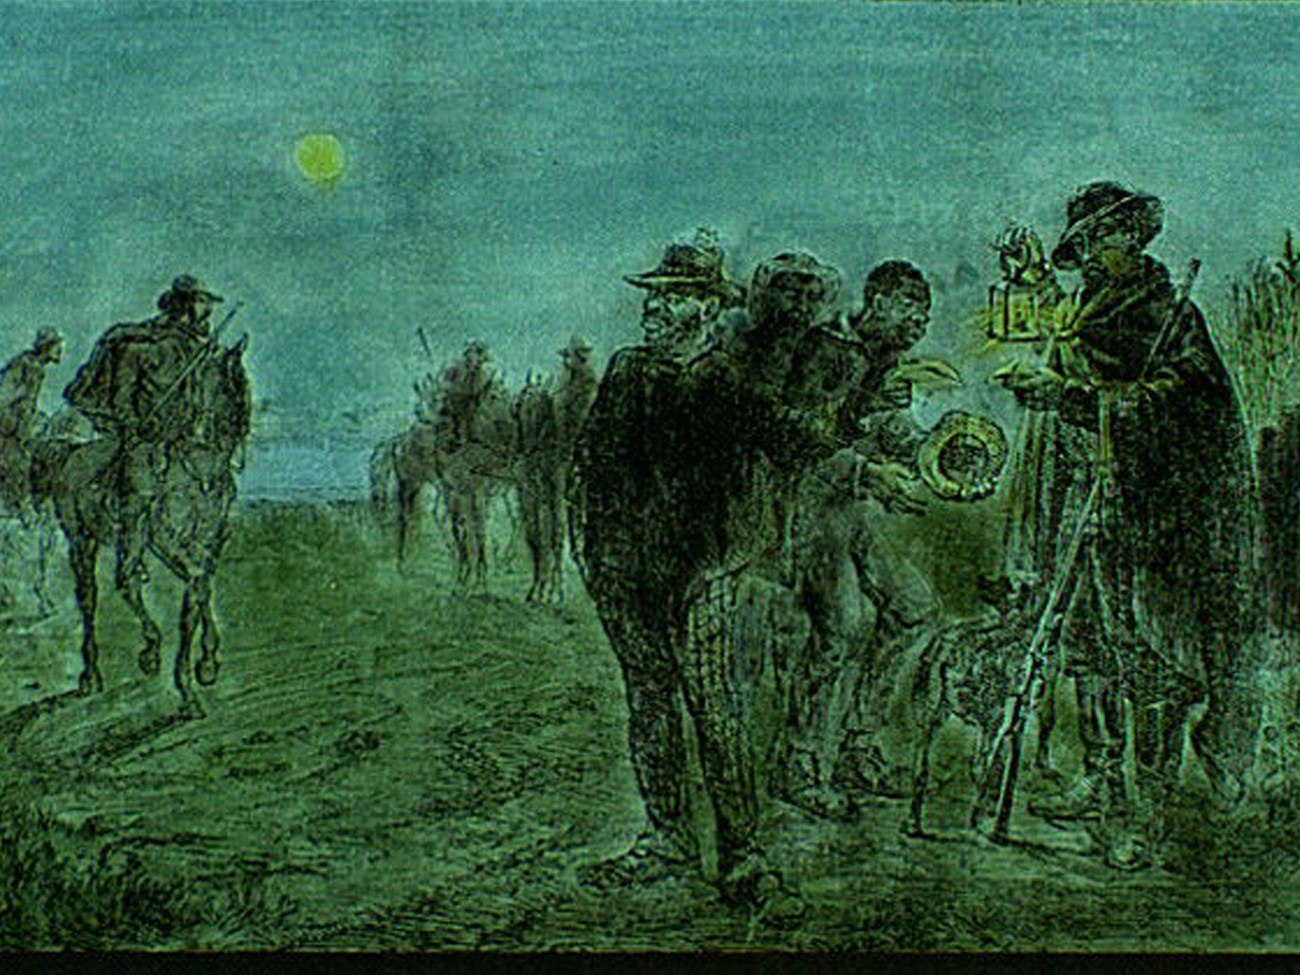 Drawing of People on a dirt road at night